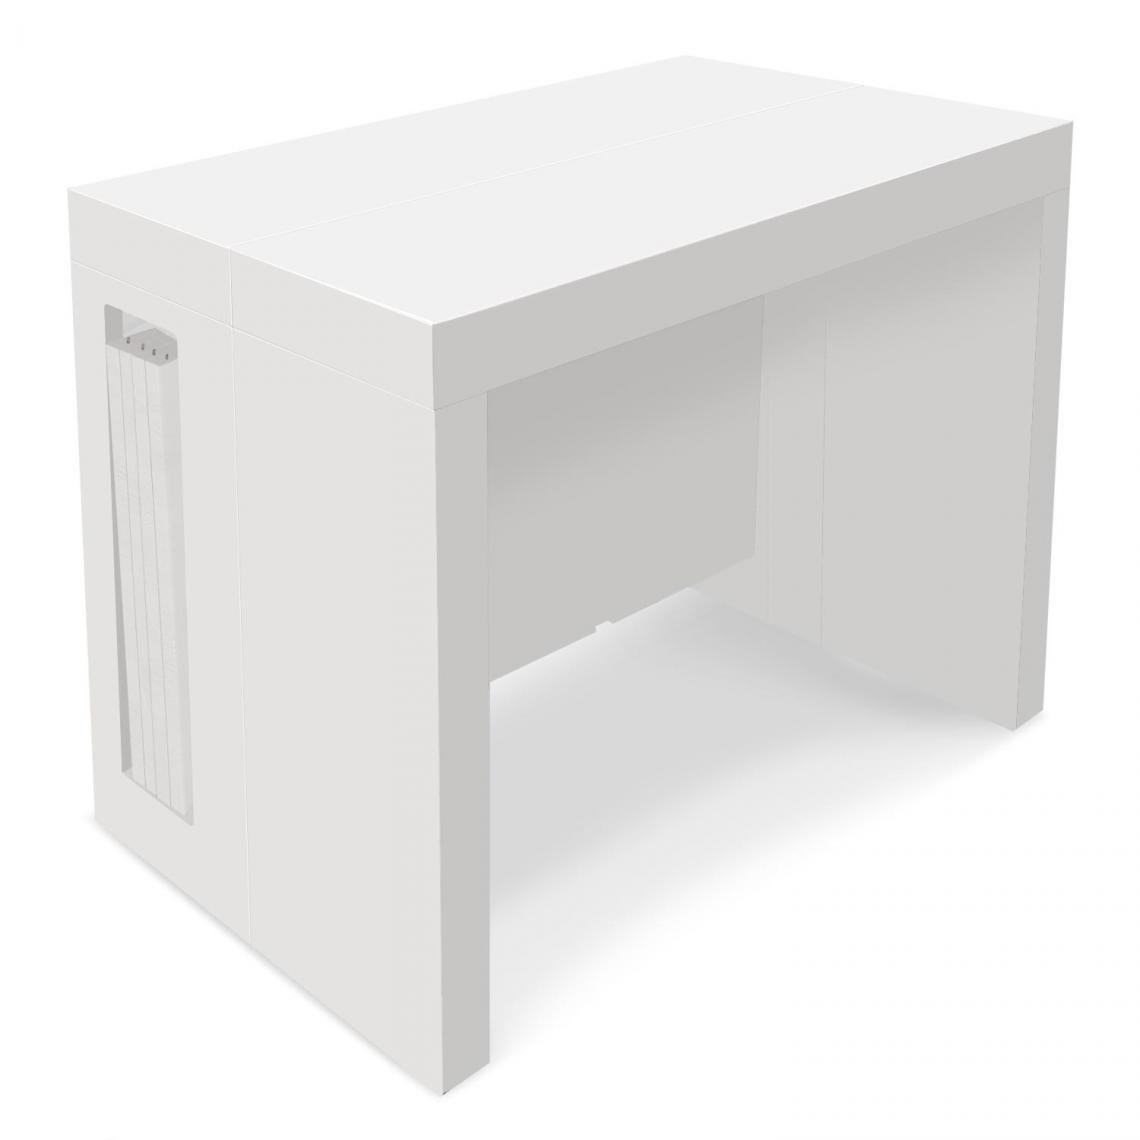 3S. x Home - Console Extensible Blanc Laqué MAYLINE - Consoles